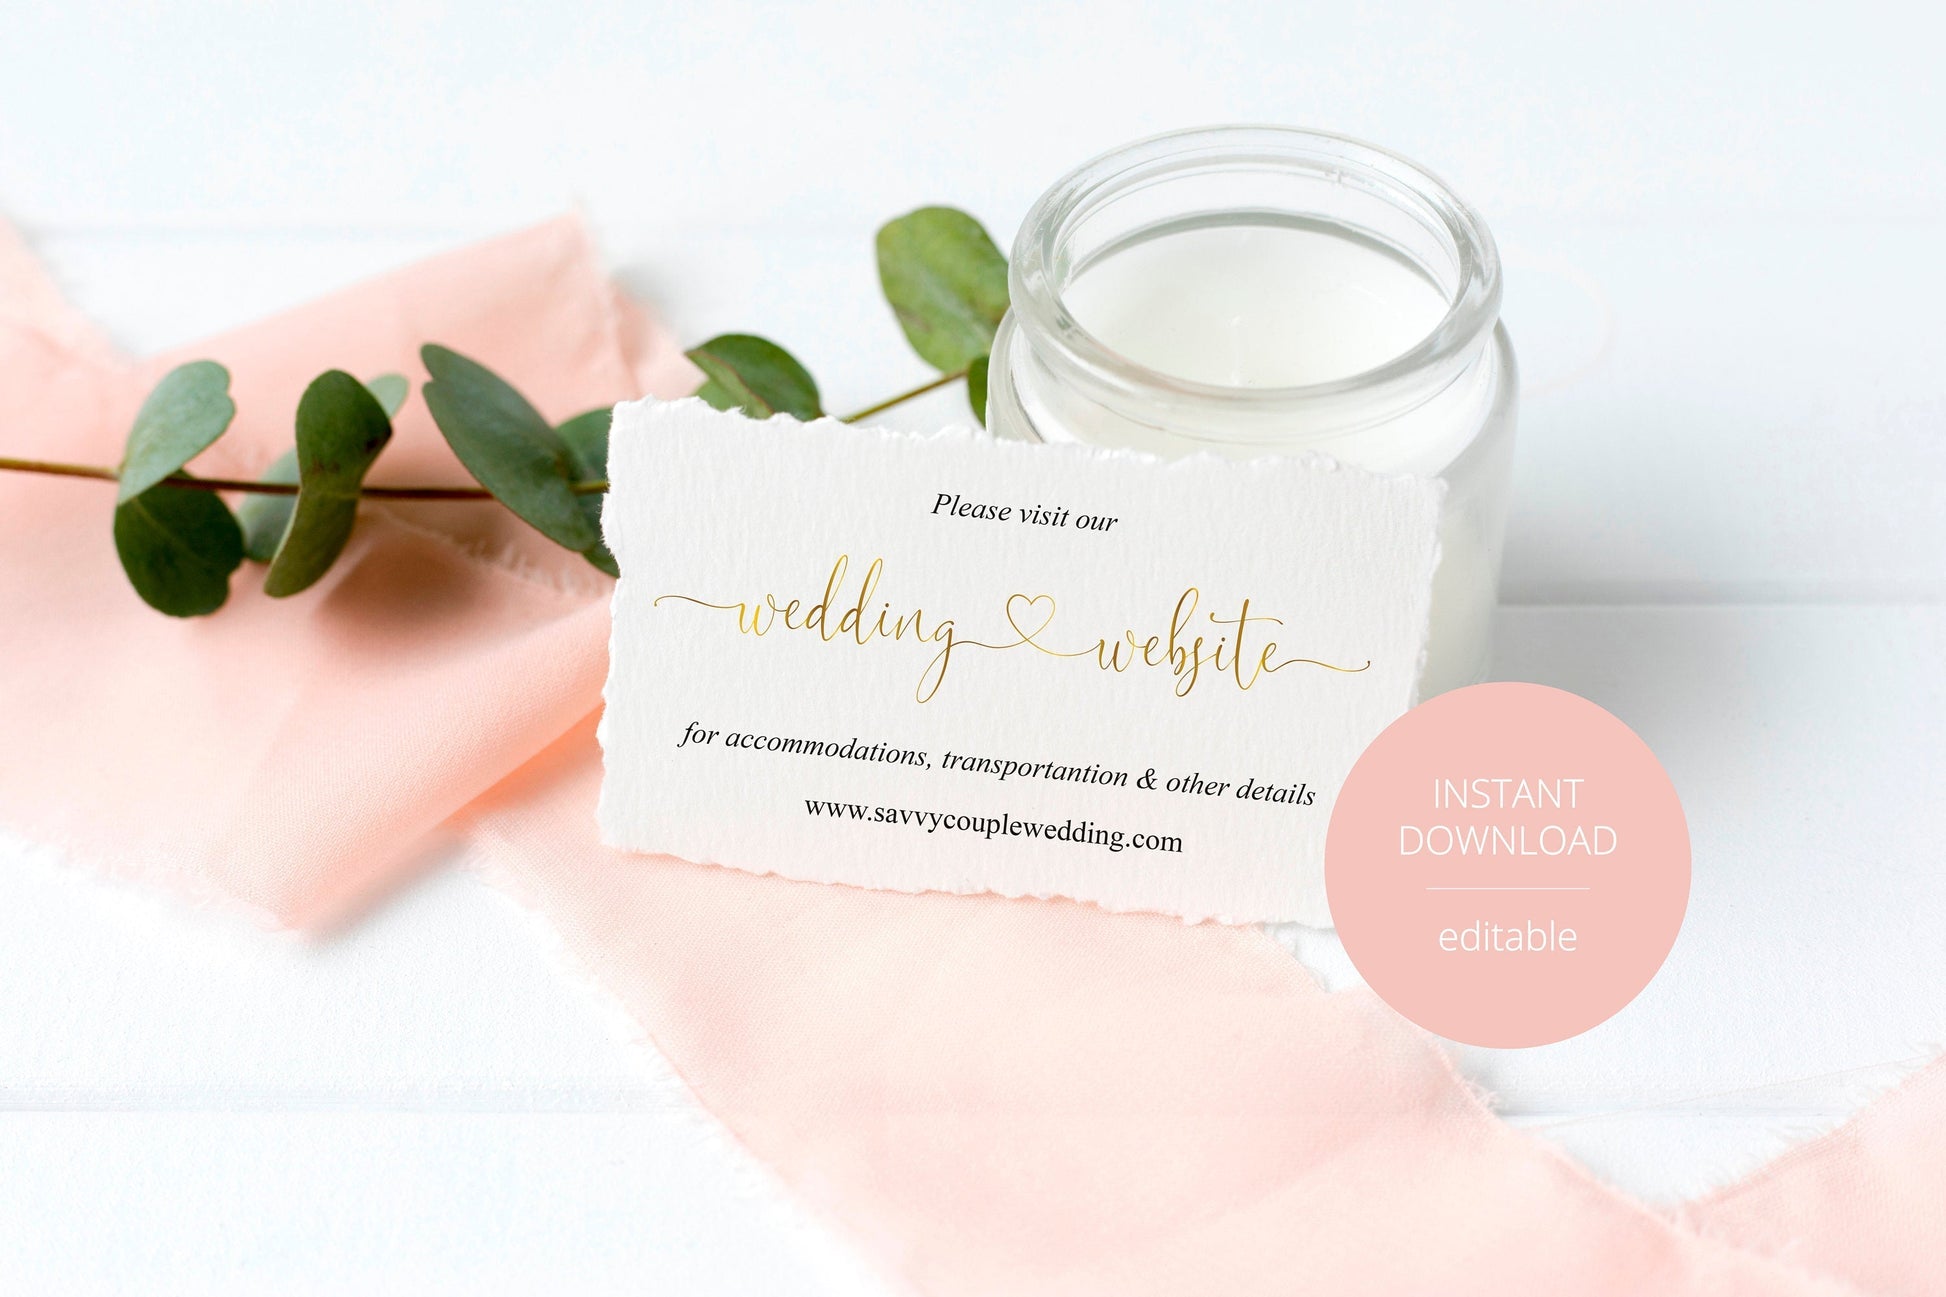 Wedding Website Card Insert Template, Website Insert Cards, Wedding Insert Cards, Visit our Website, Wedding Invitation Insert Gold -Heather TAGS | TY | INSERTS SAVVY PAPER CO